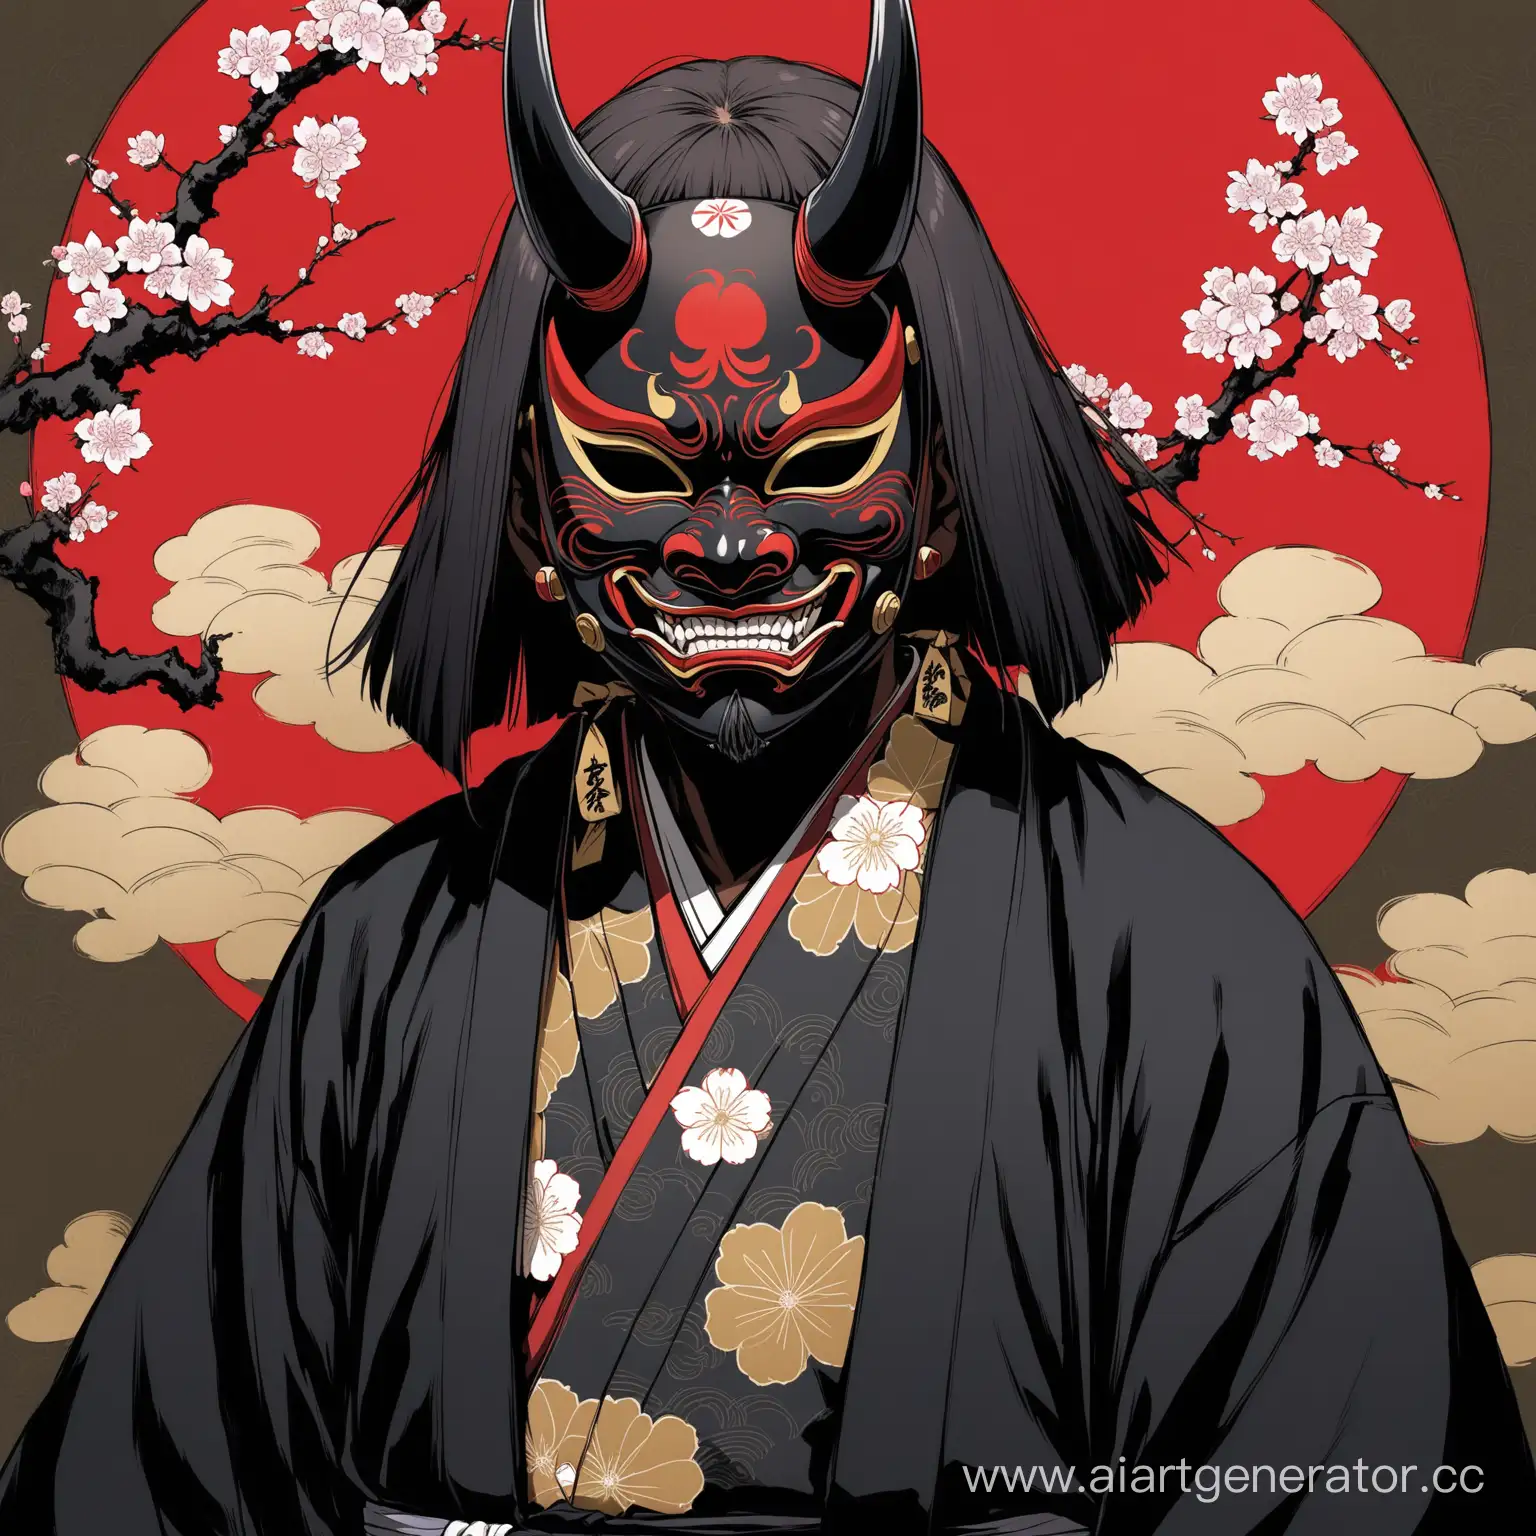 Young-Black-Samurai-in-Hannya-Mask-with-Japanese-Symbols